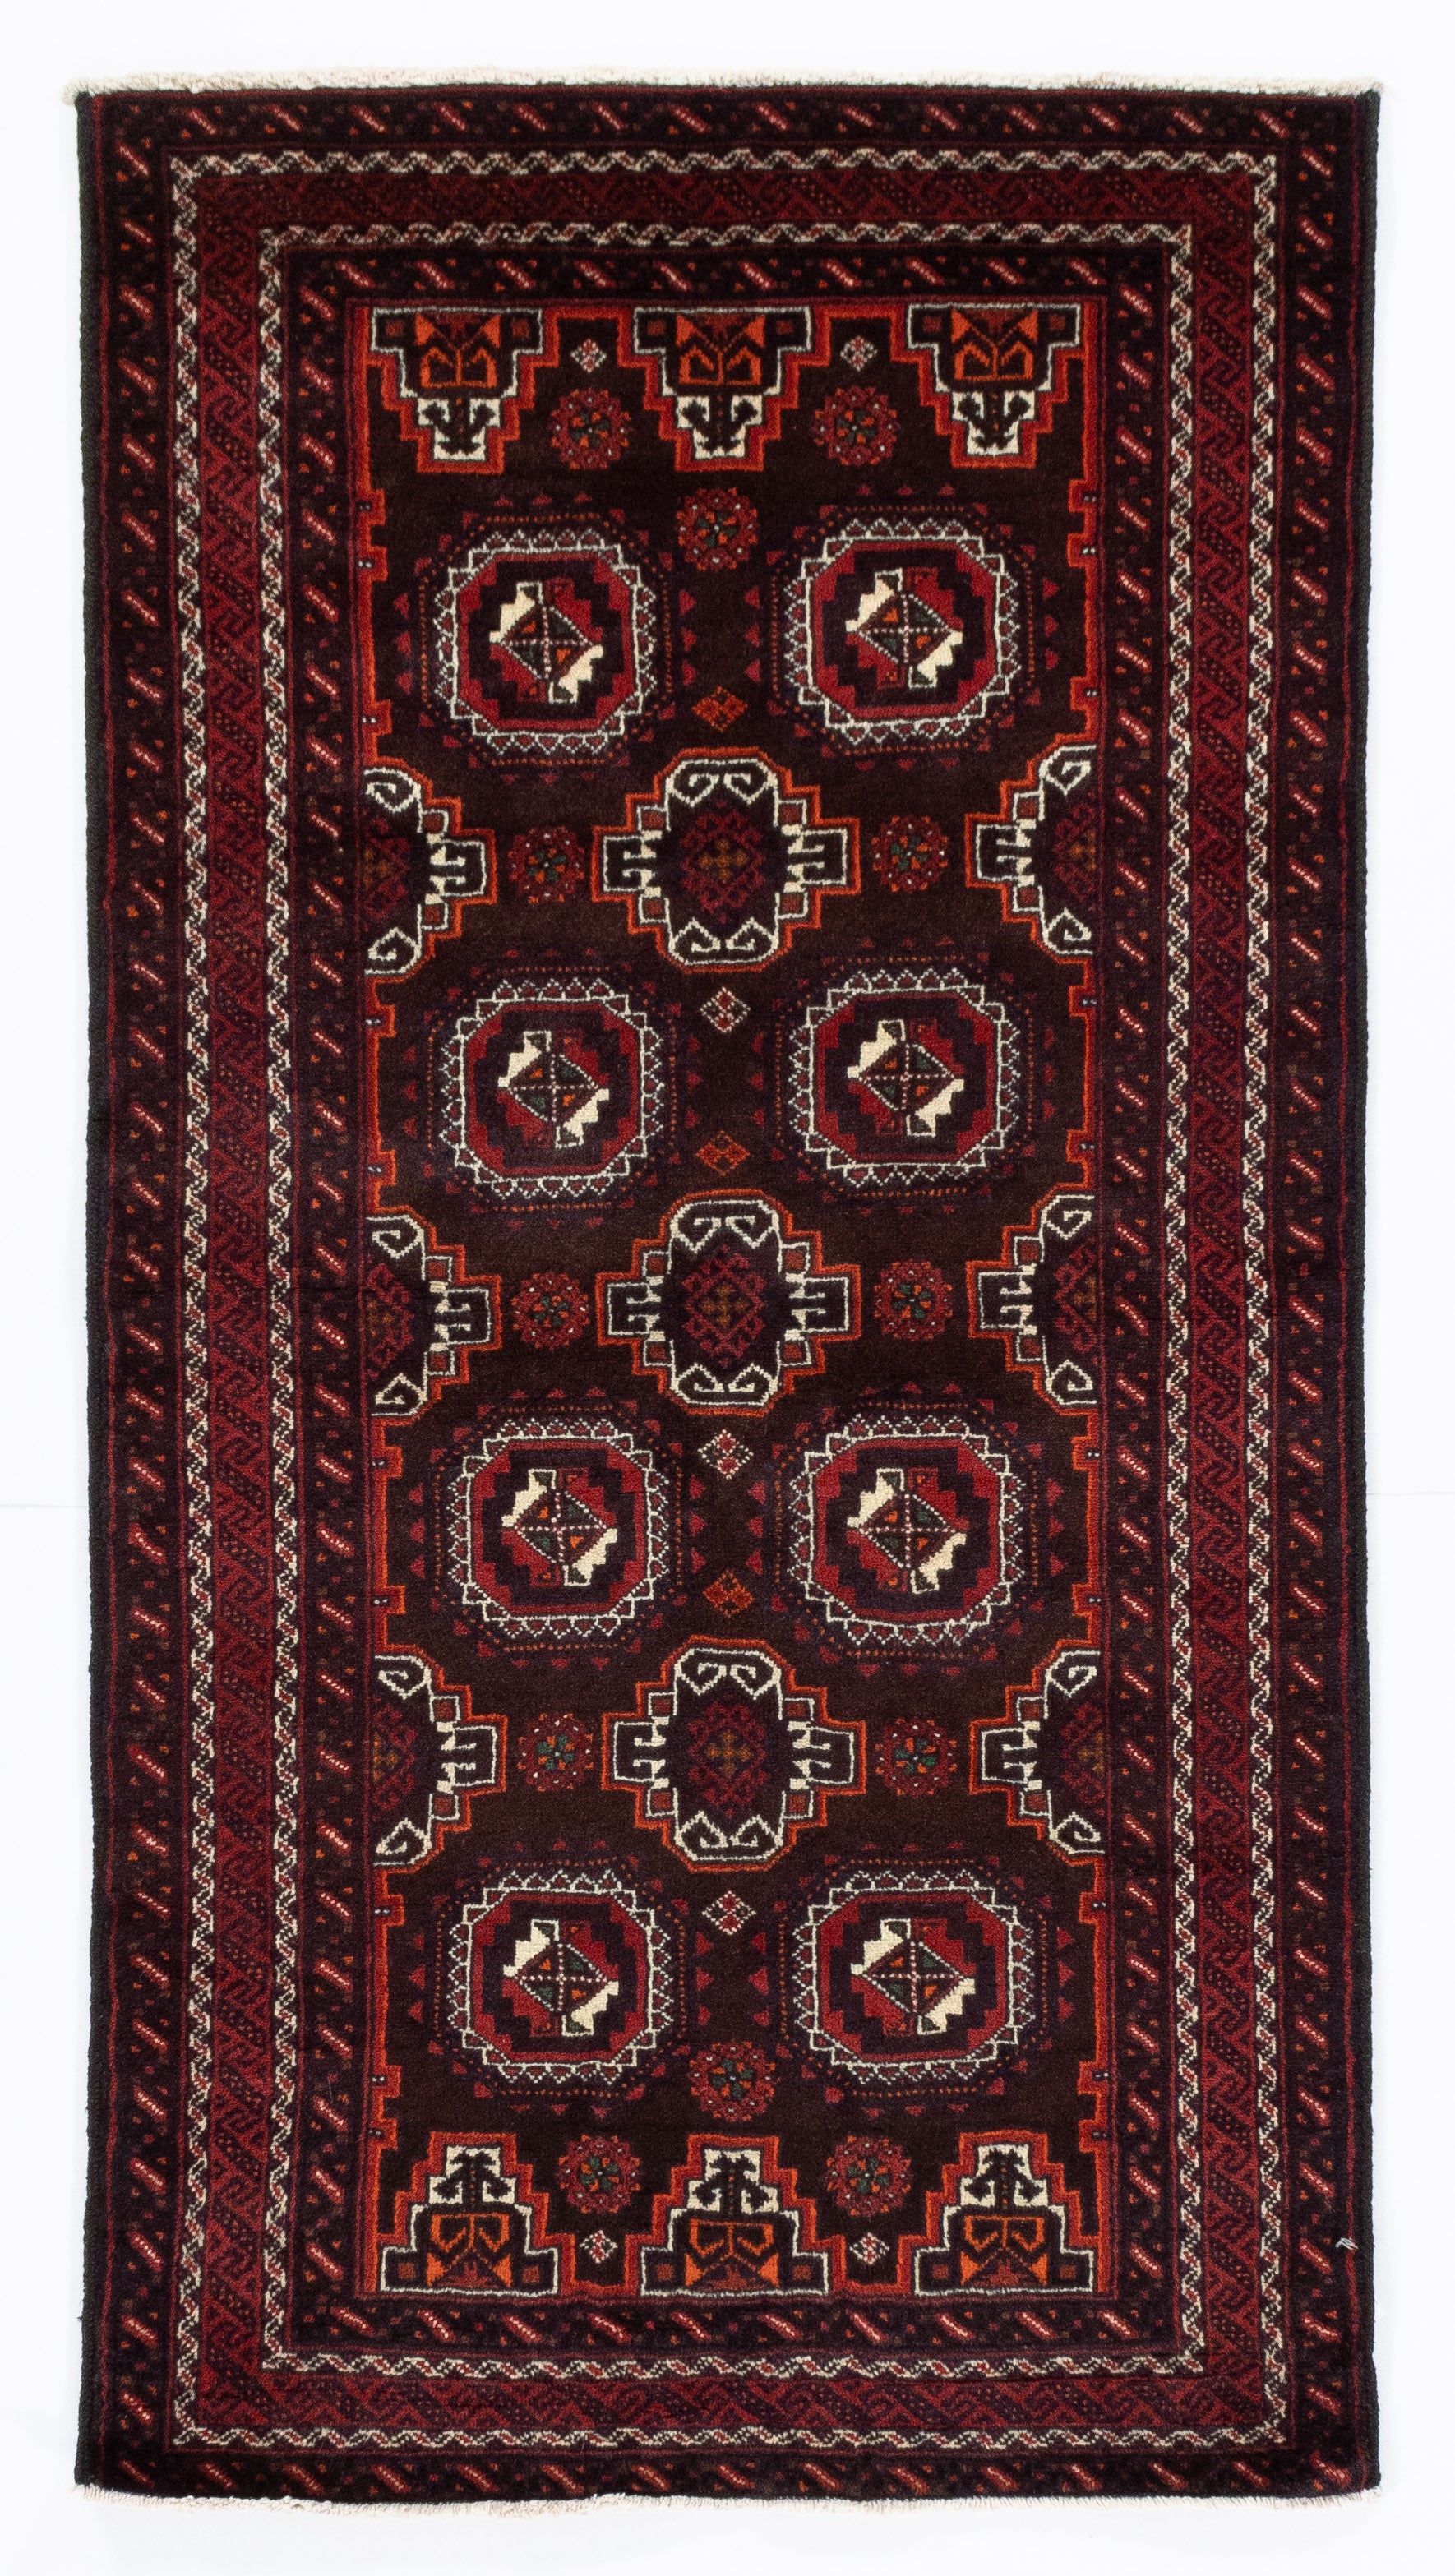 New Persian Balouch Rug <br> 3' 5 x 6' 3